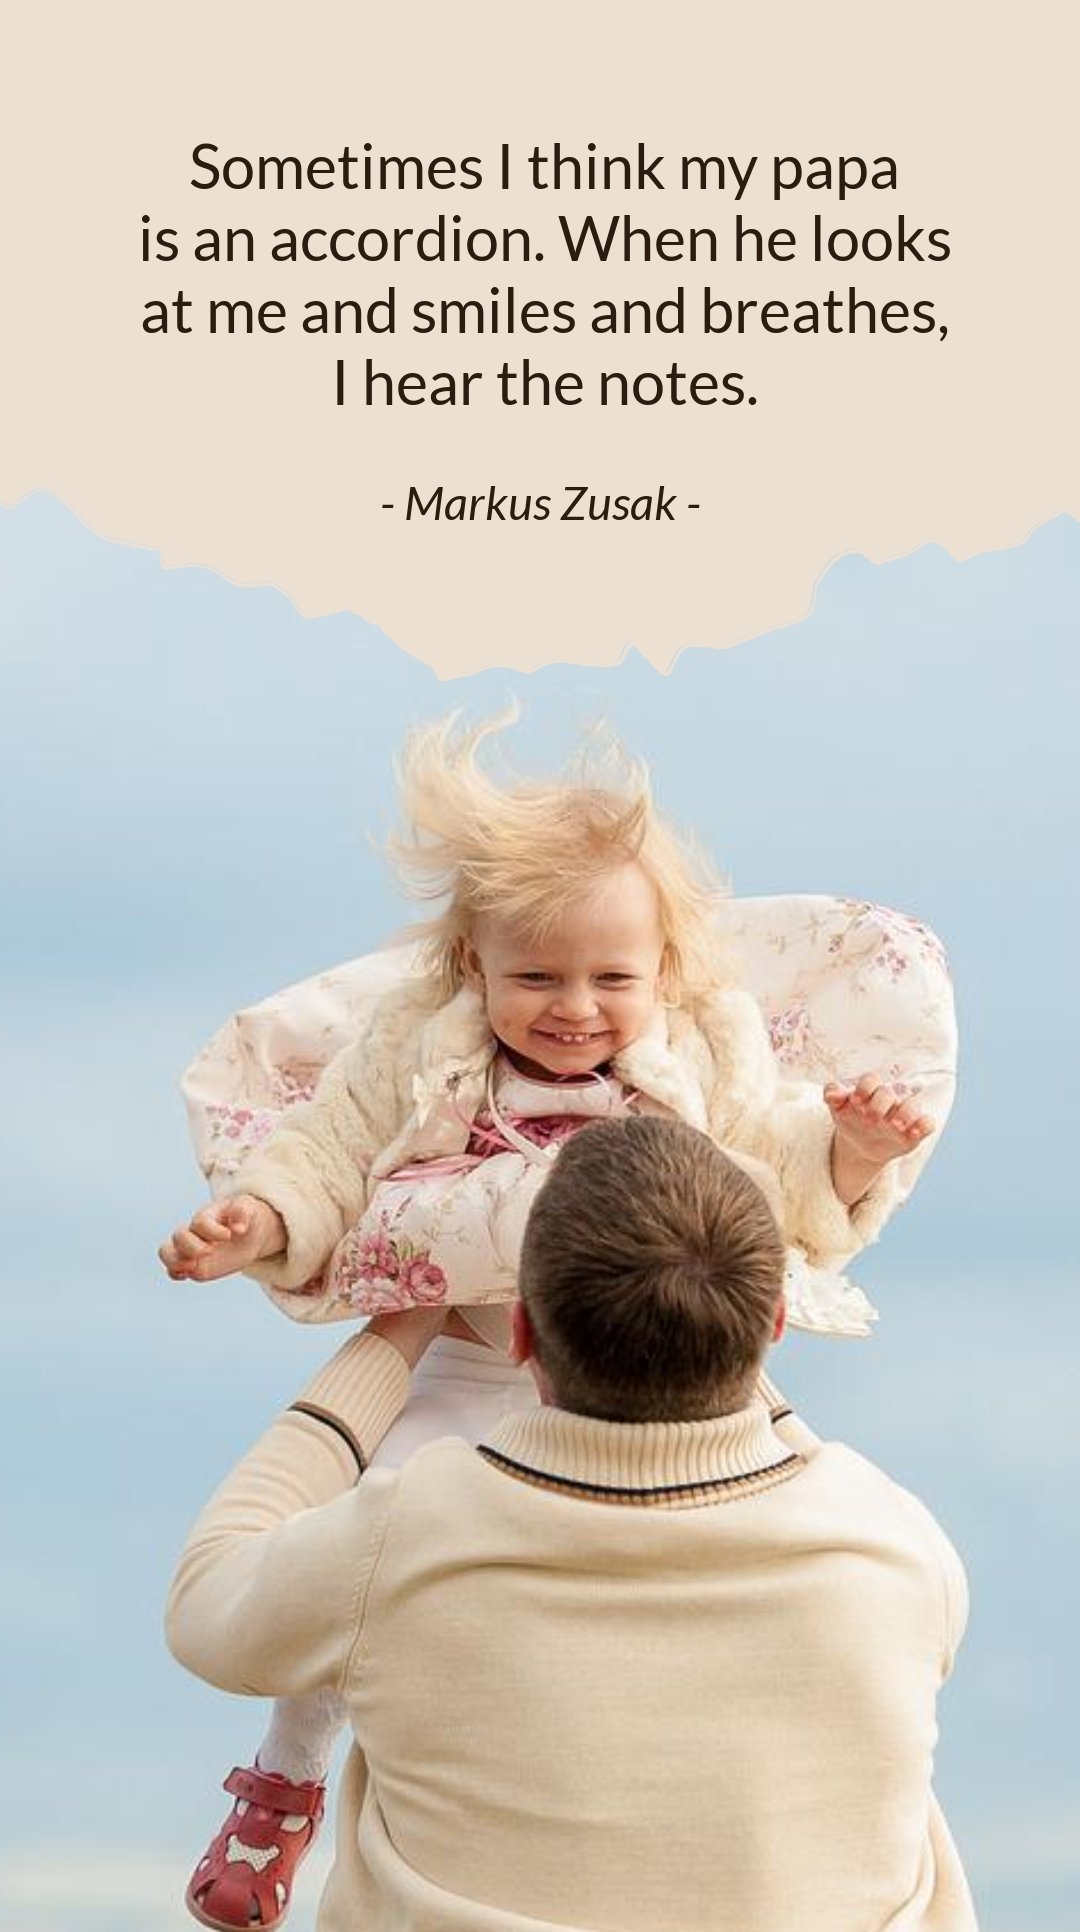 Markus Zusak - Sometimes I think my papa is an accordion. When he looks at me and smiles and breathes, I hear the notes. Template